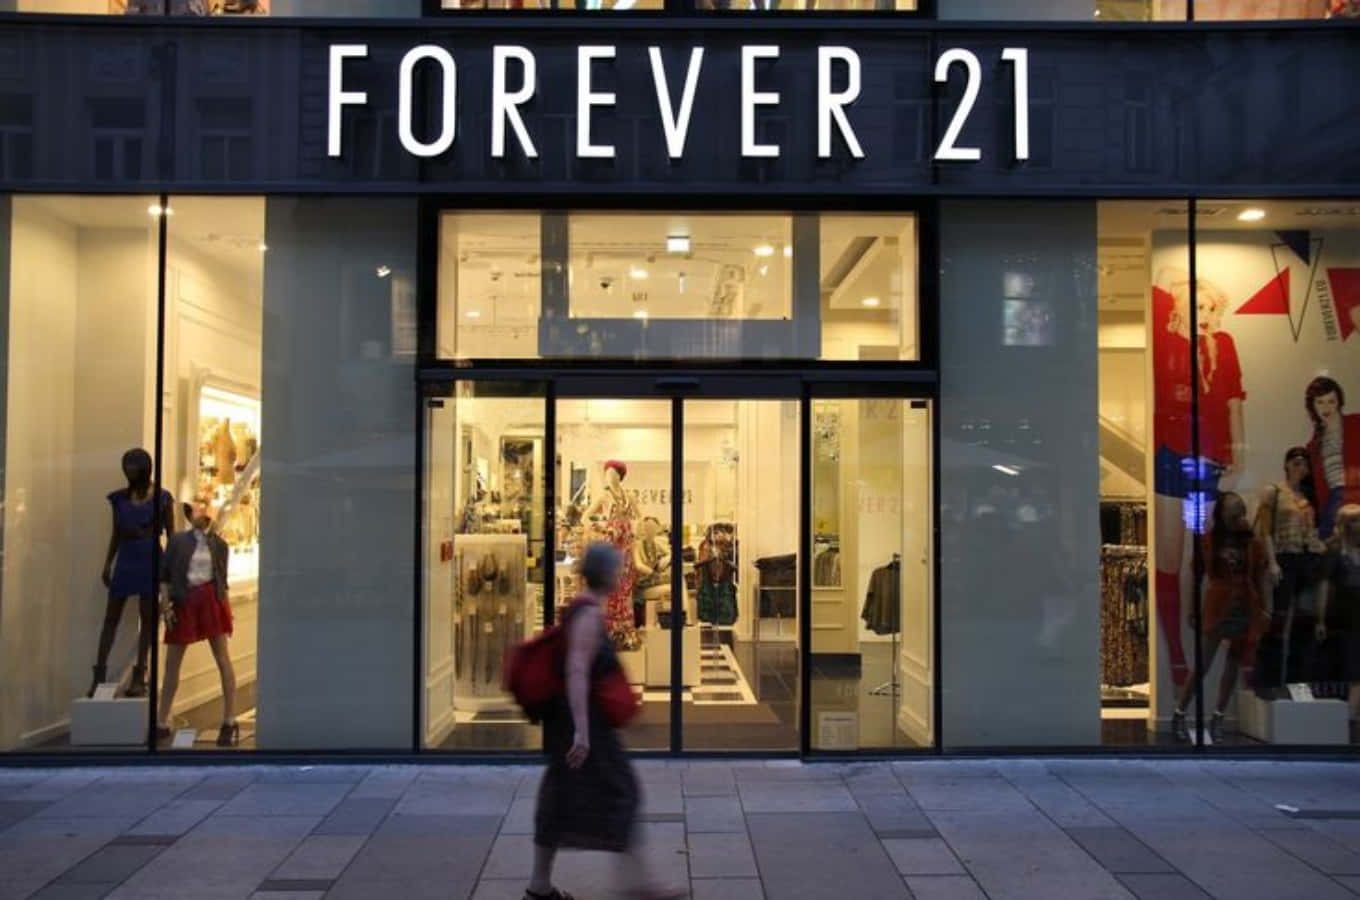 Look stylish and trendy in the newest arrivals from Forever 21!